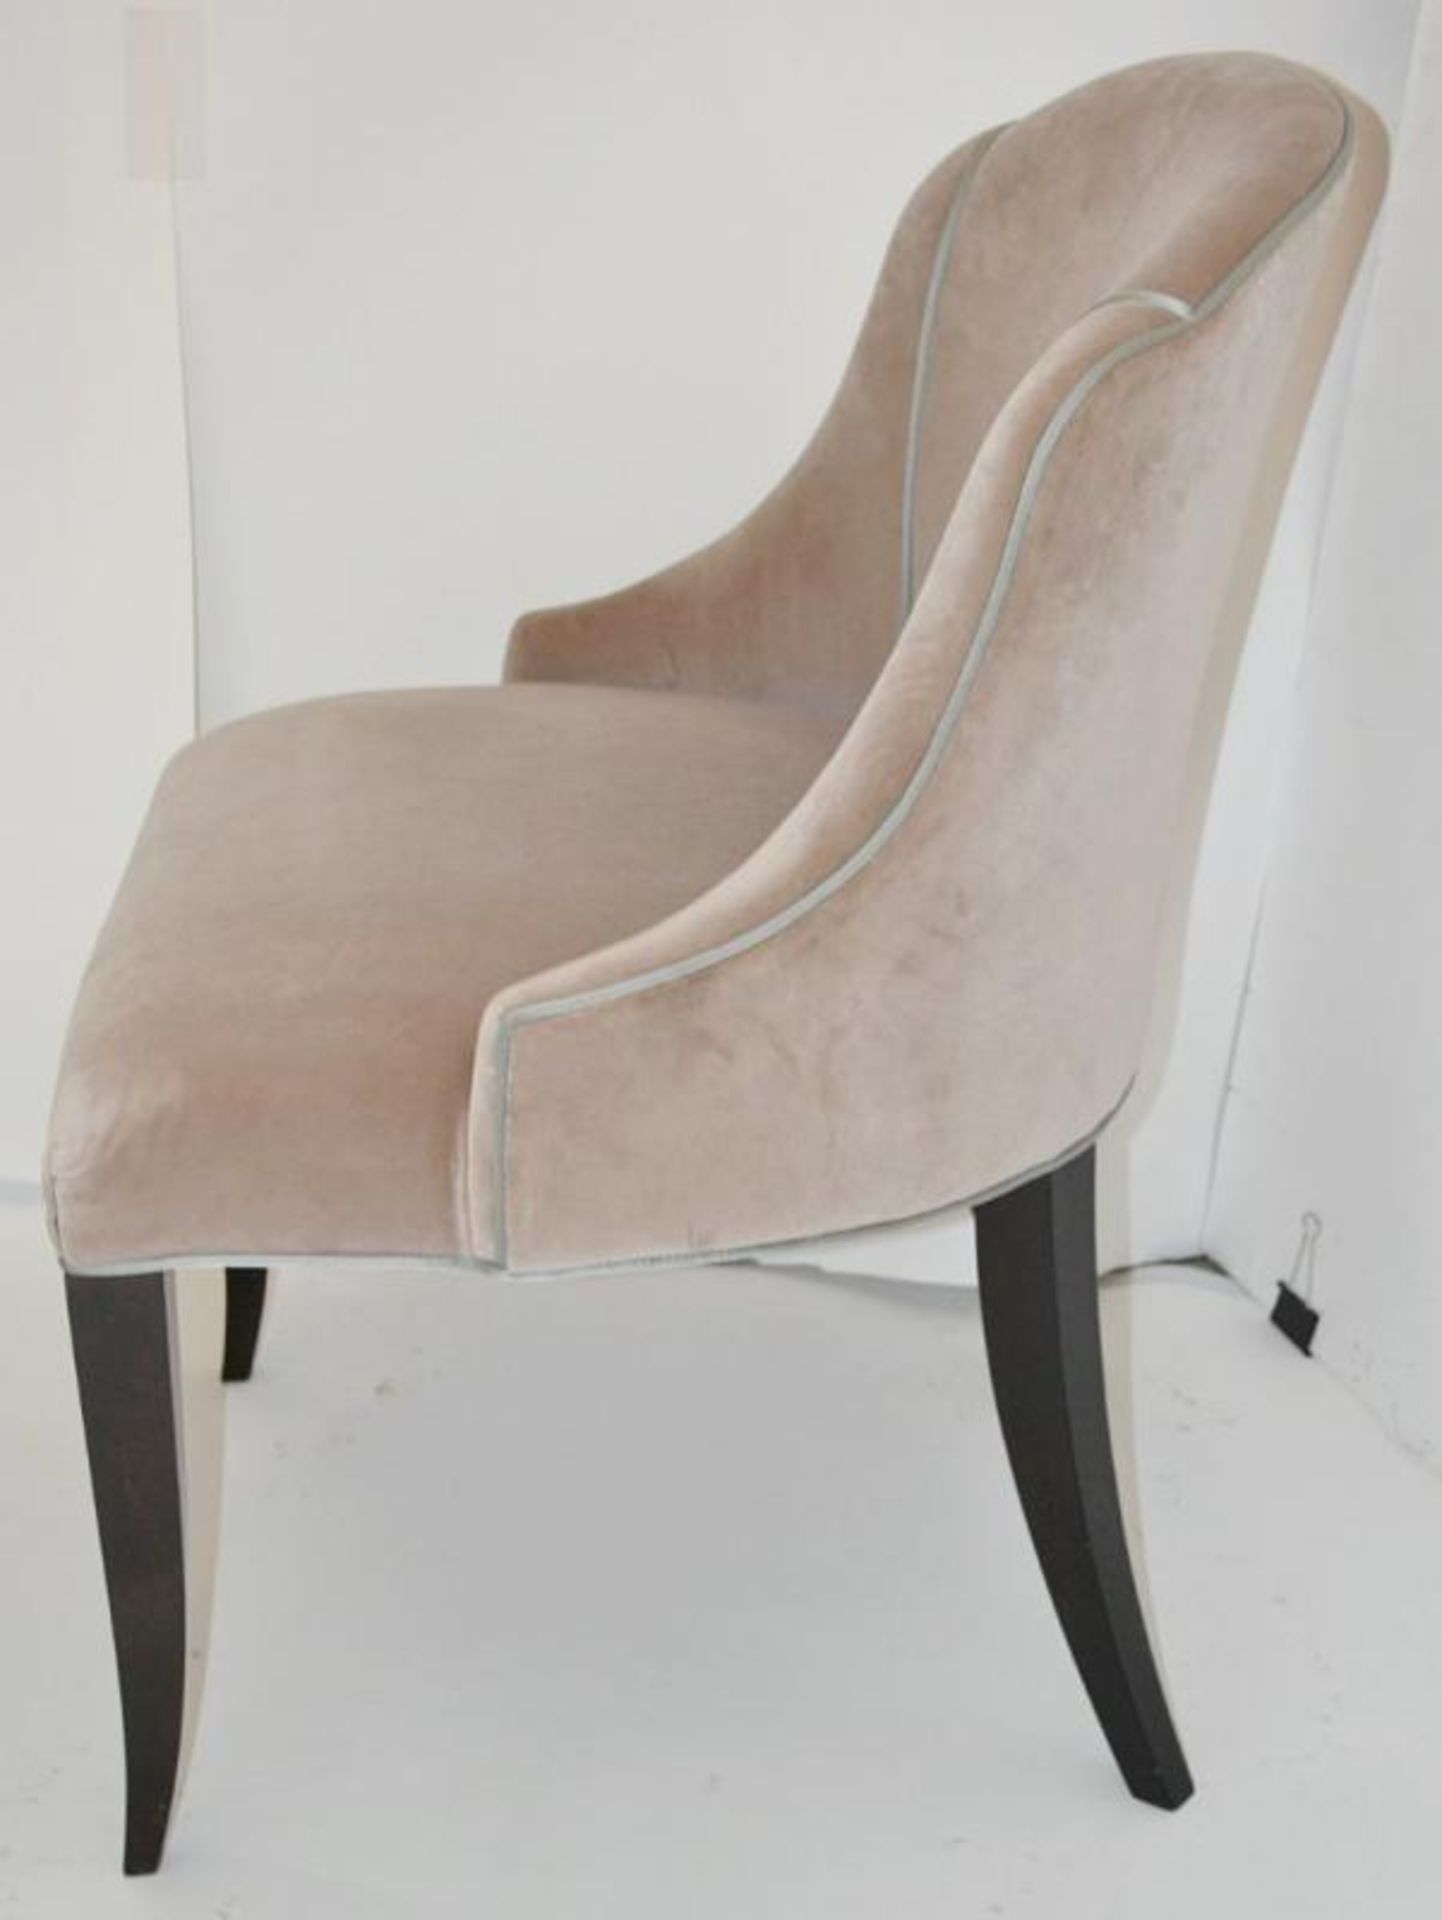 1 x REED &amp; RACKSTRAW "Cloud" Velvet Upholstered Handcrafted Chair - Dimensions: H87 x W58 x D5 - Image 3 of 12